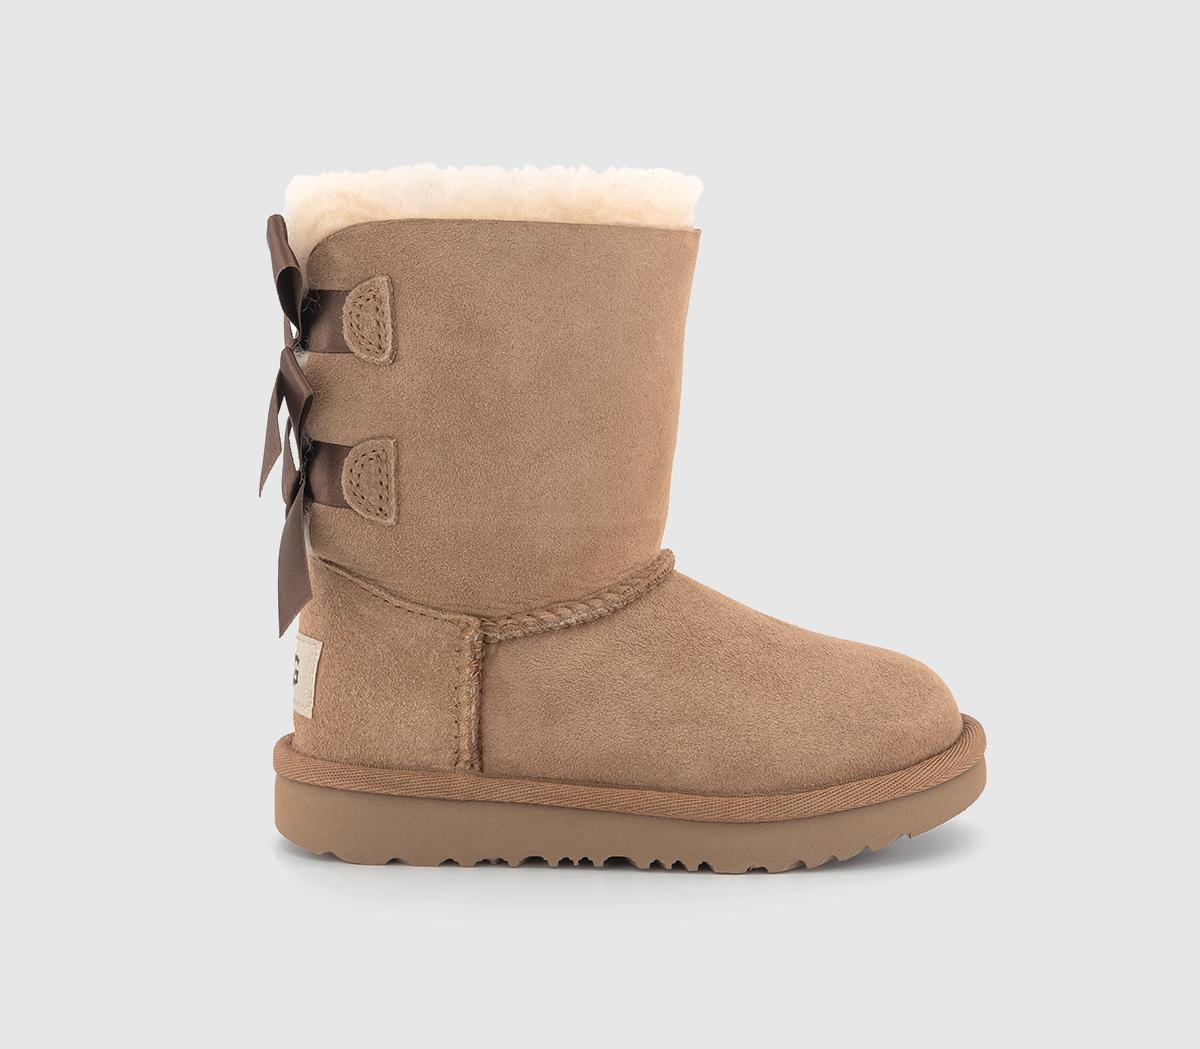 Kids Toddler Bailey Bow Ii Boots Chestnut Tan